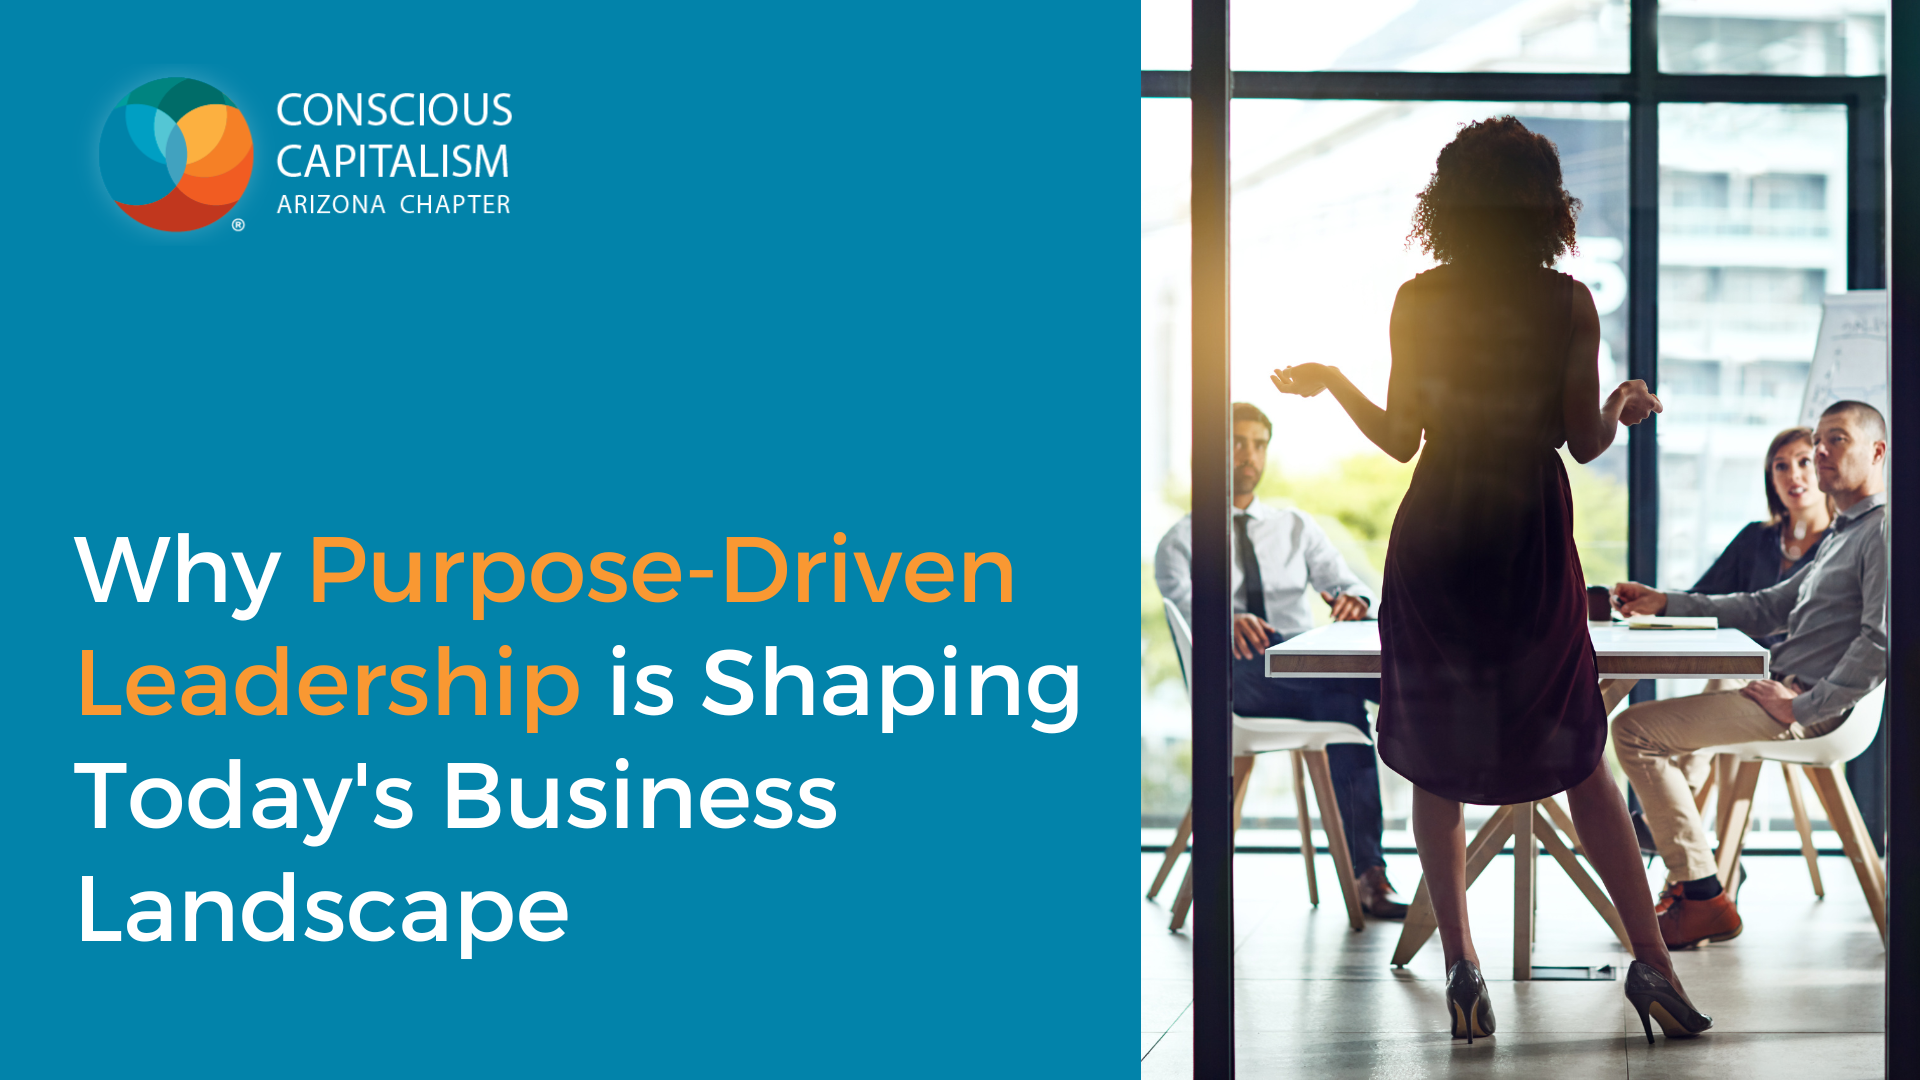 10 Reasons Why Purpose-Driven Leadership is Shaping Today’s Business Landscape